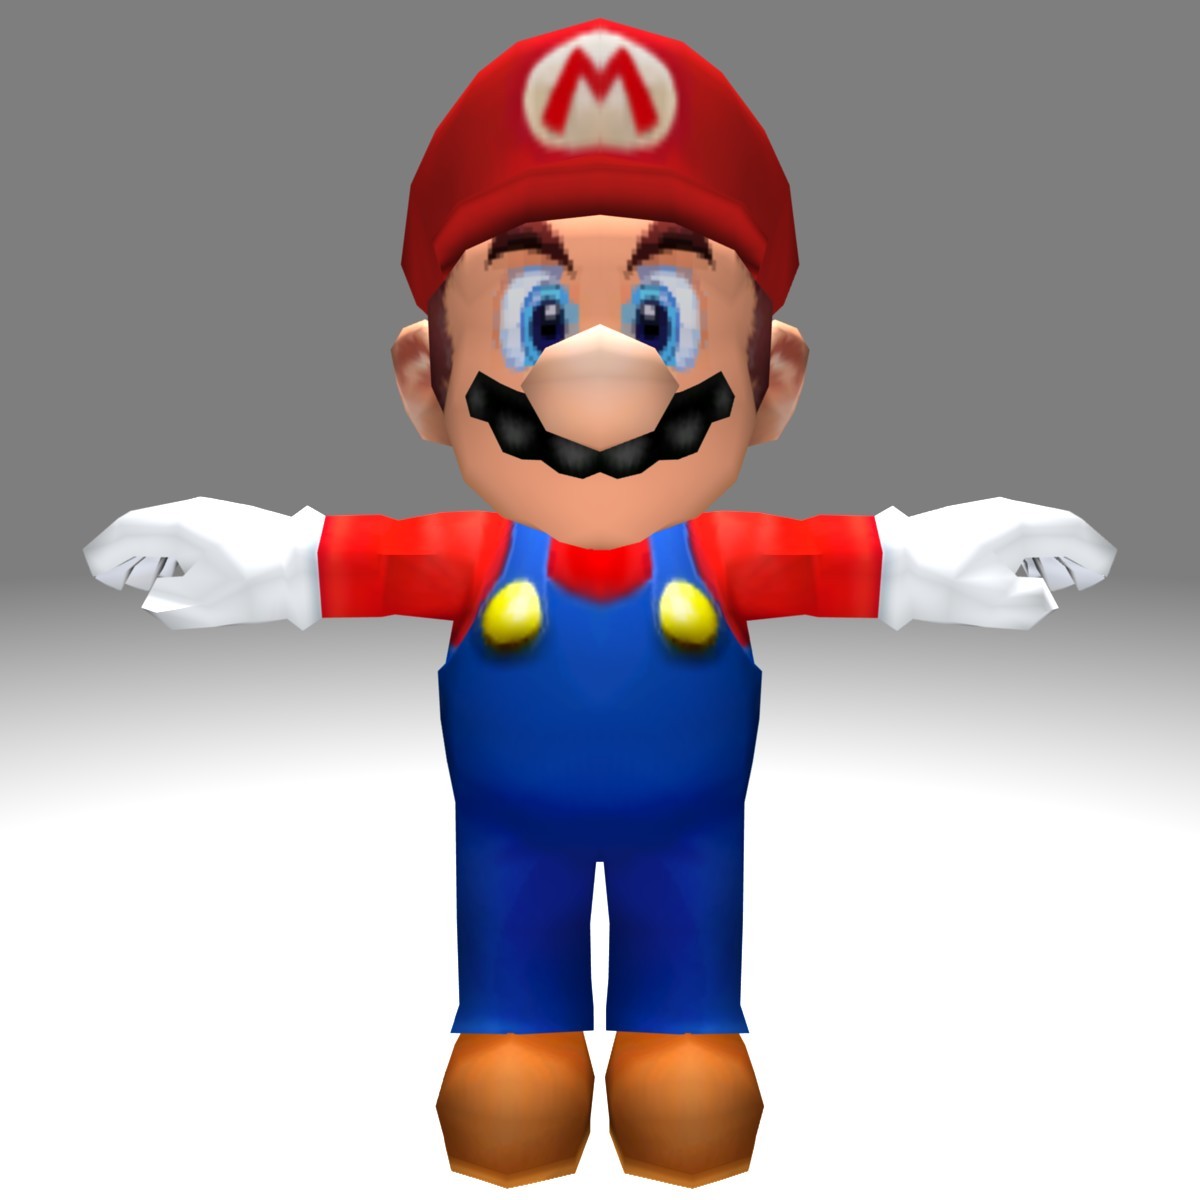 game character 3d model free download